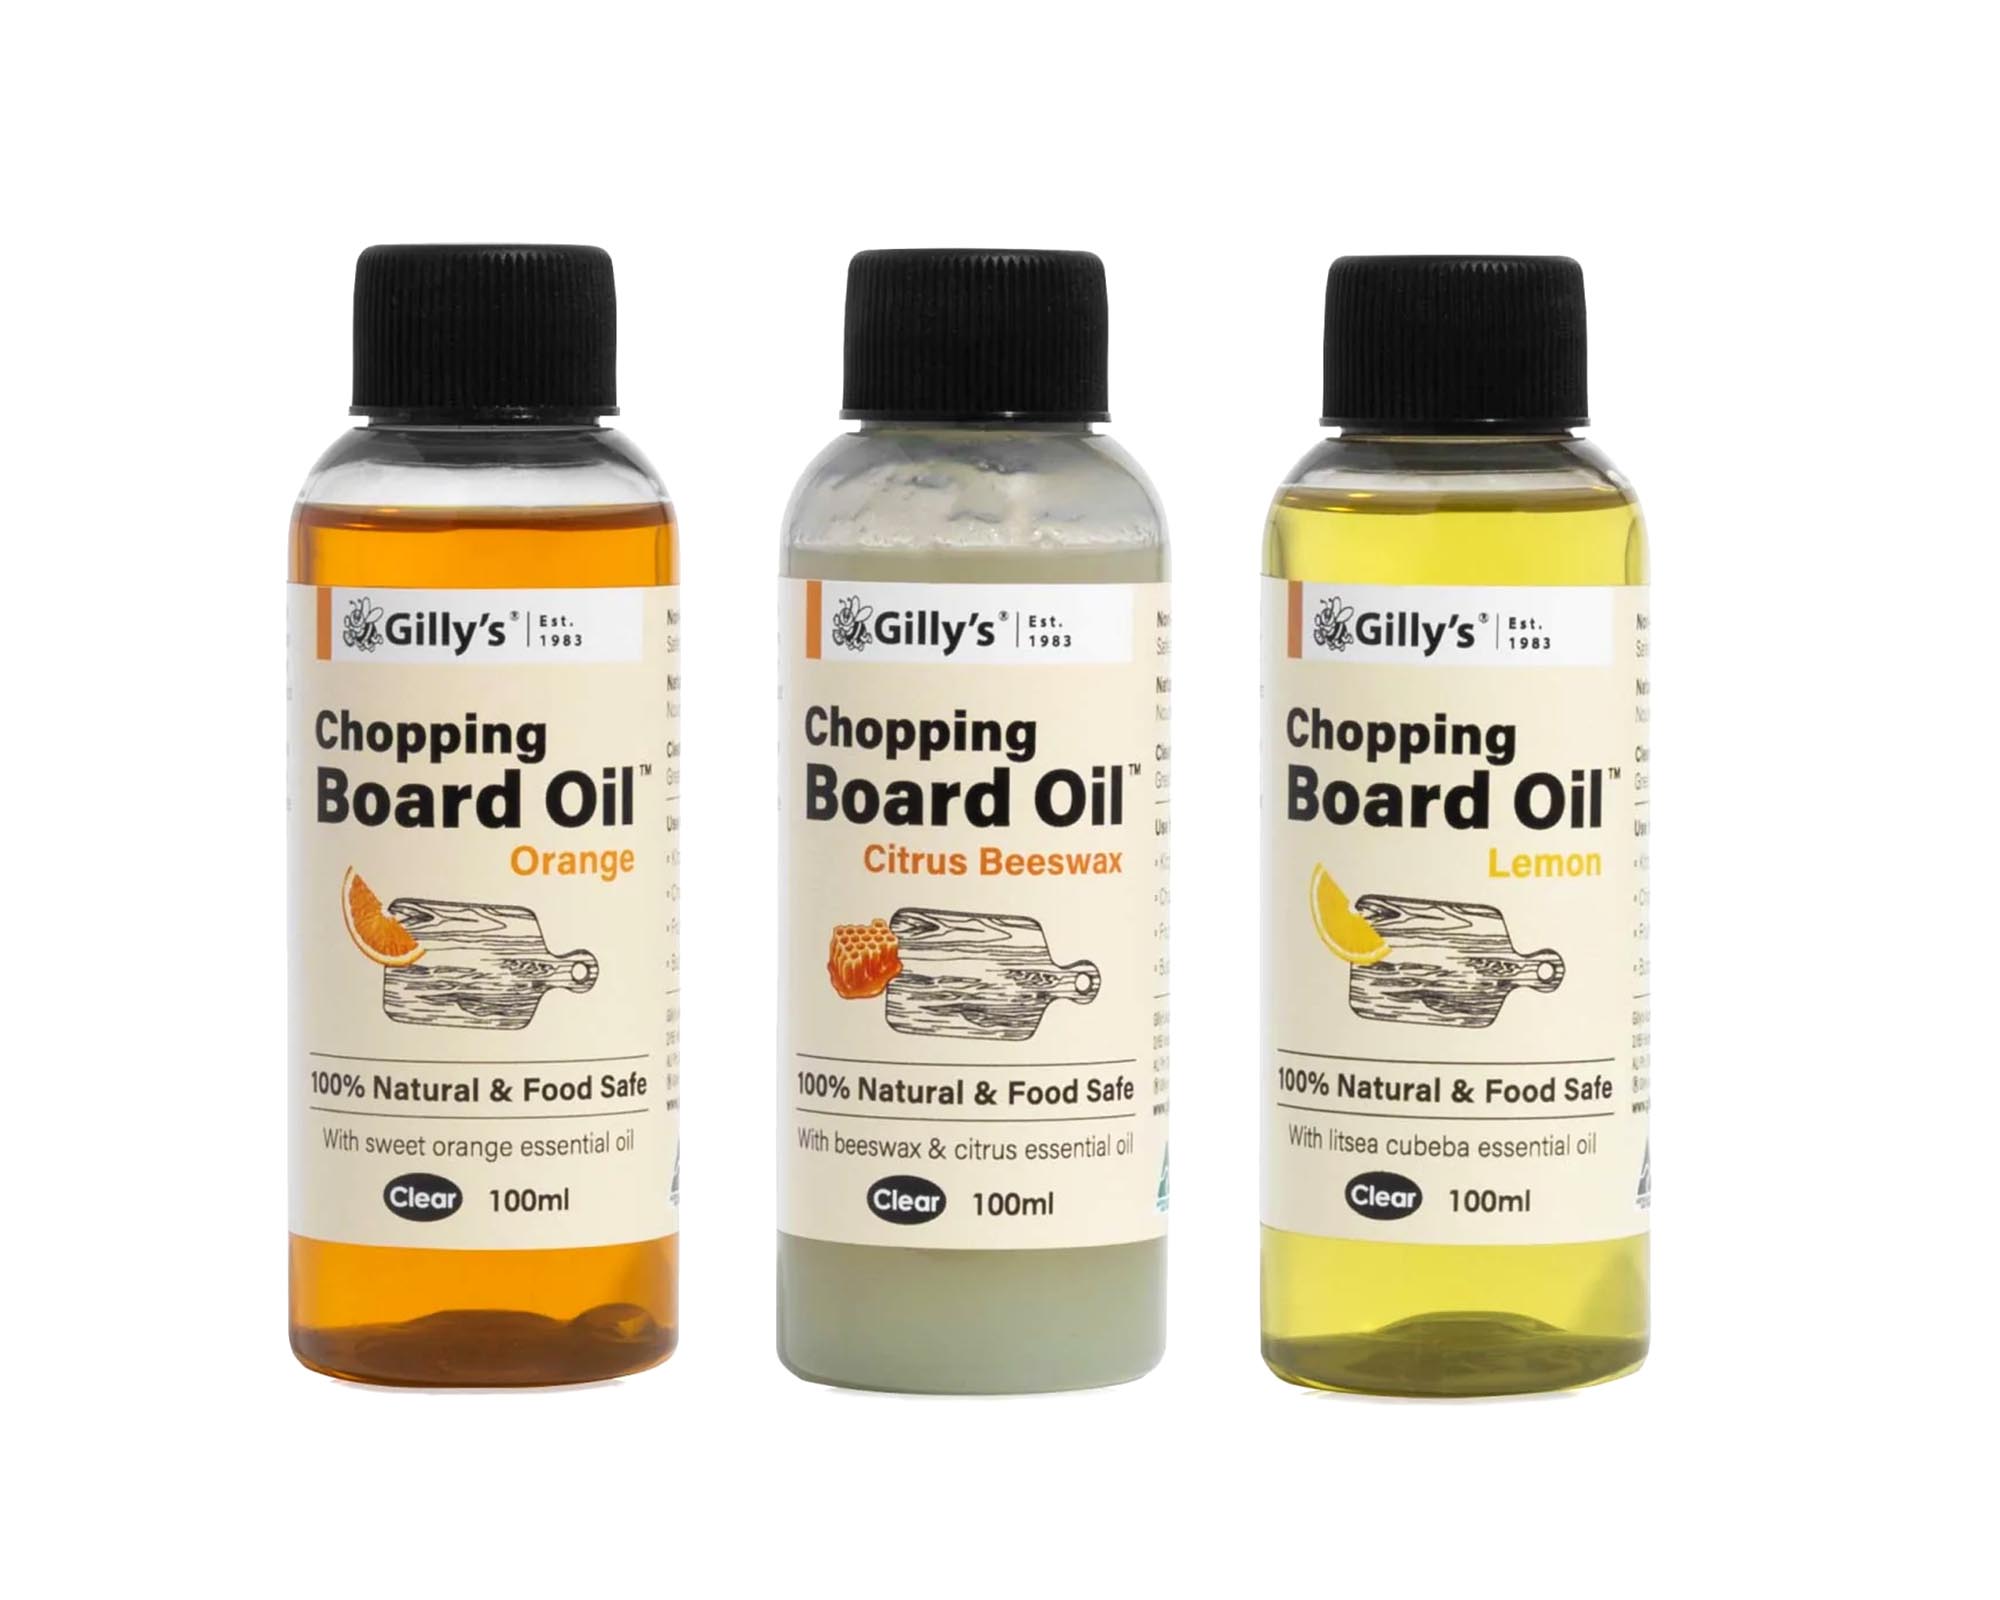 Chopping Board Oil - Gilly's ®